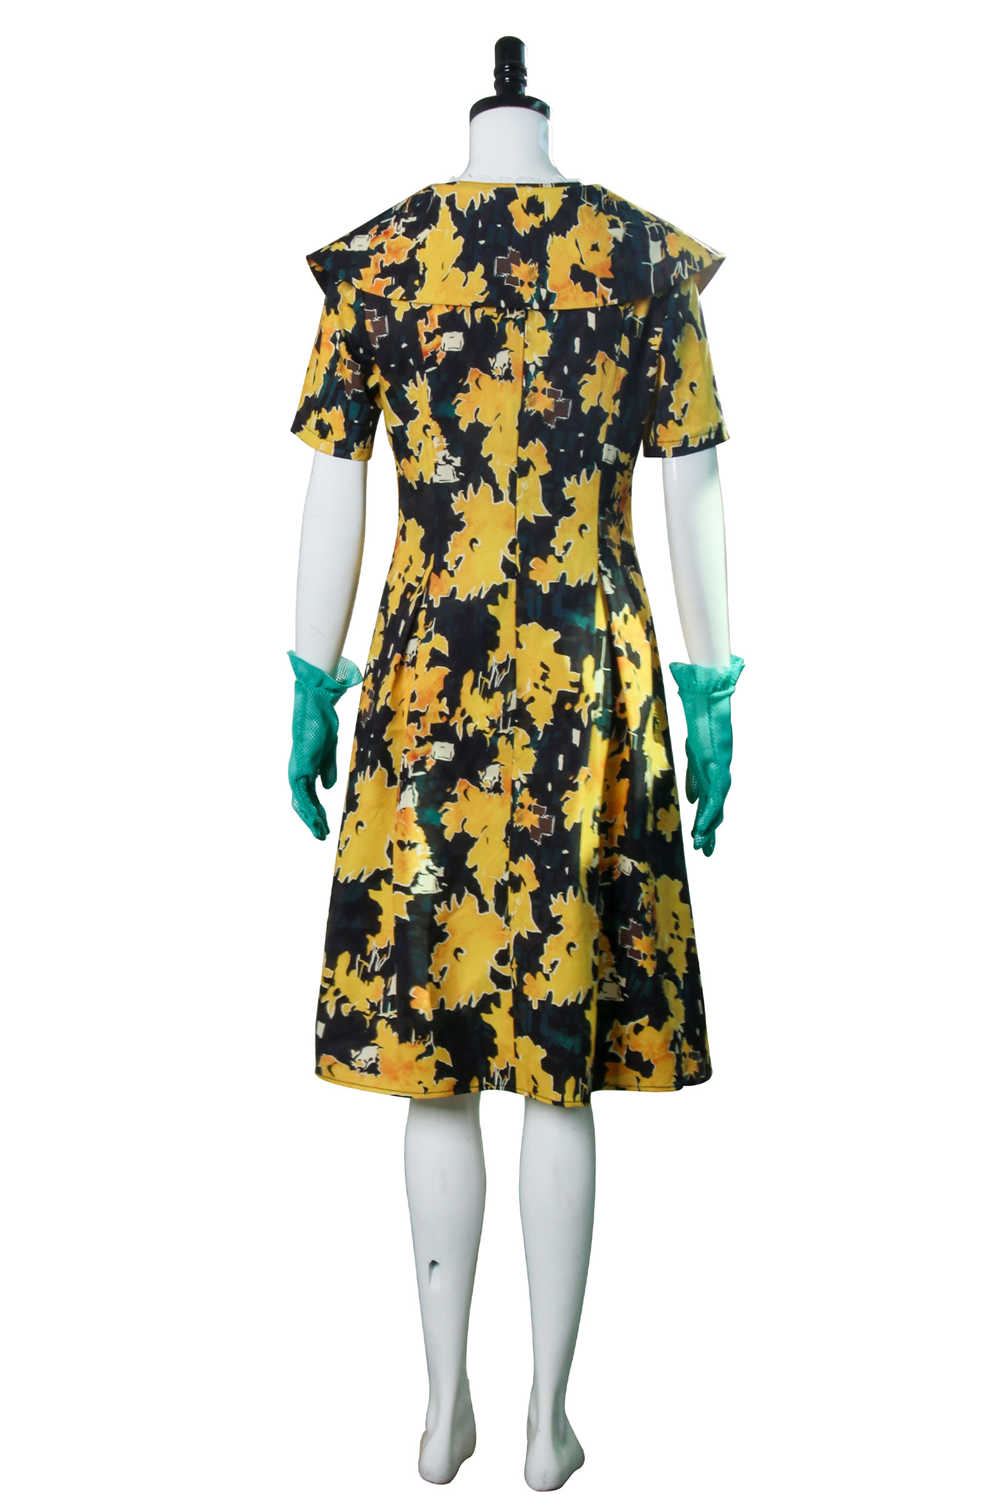 Adult The Witches Anne Hathaway Floral Dress With Gloves Grand High Witch-Takerlama